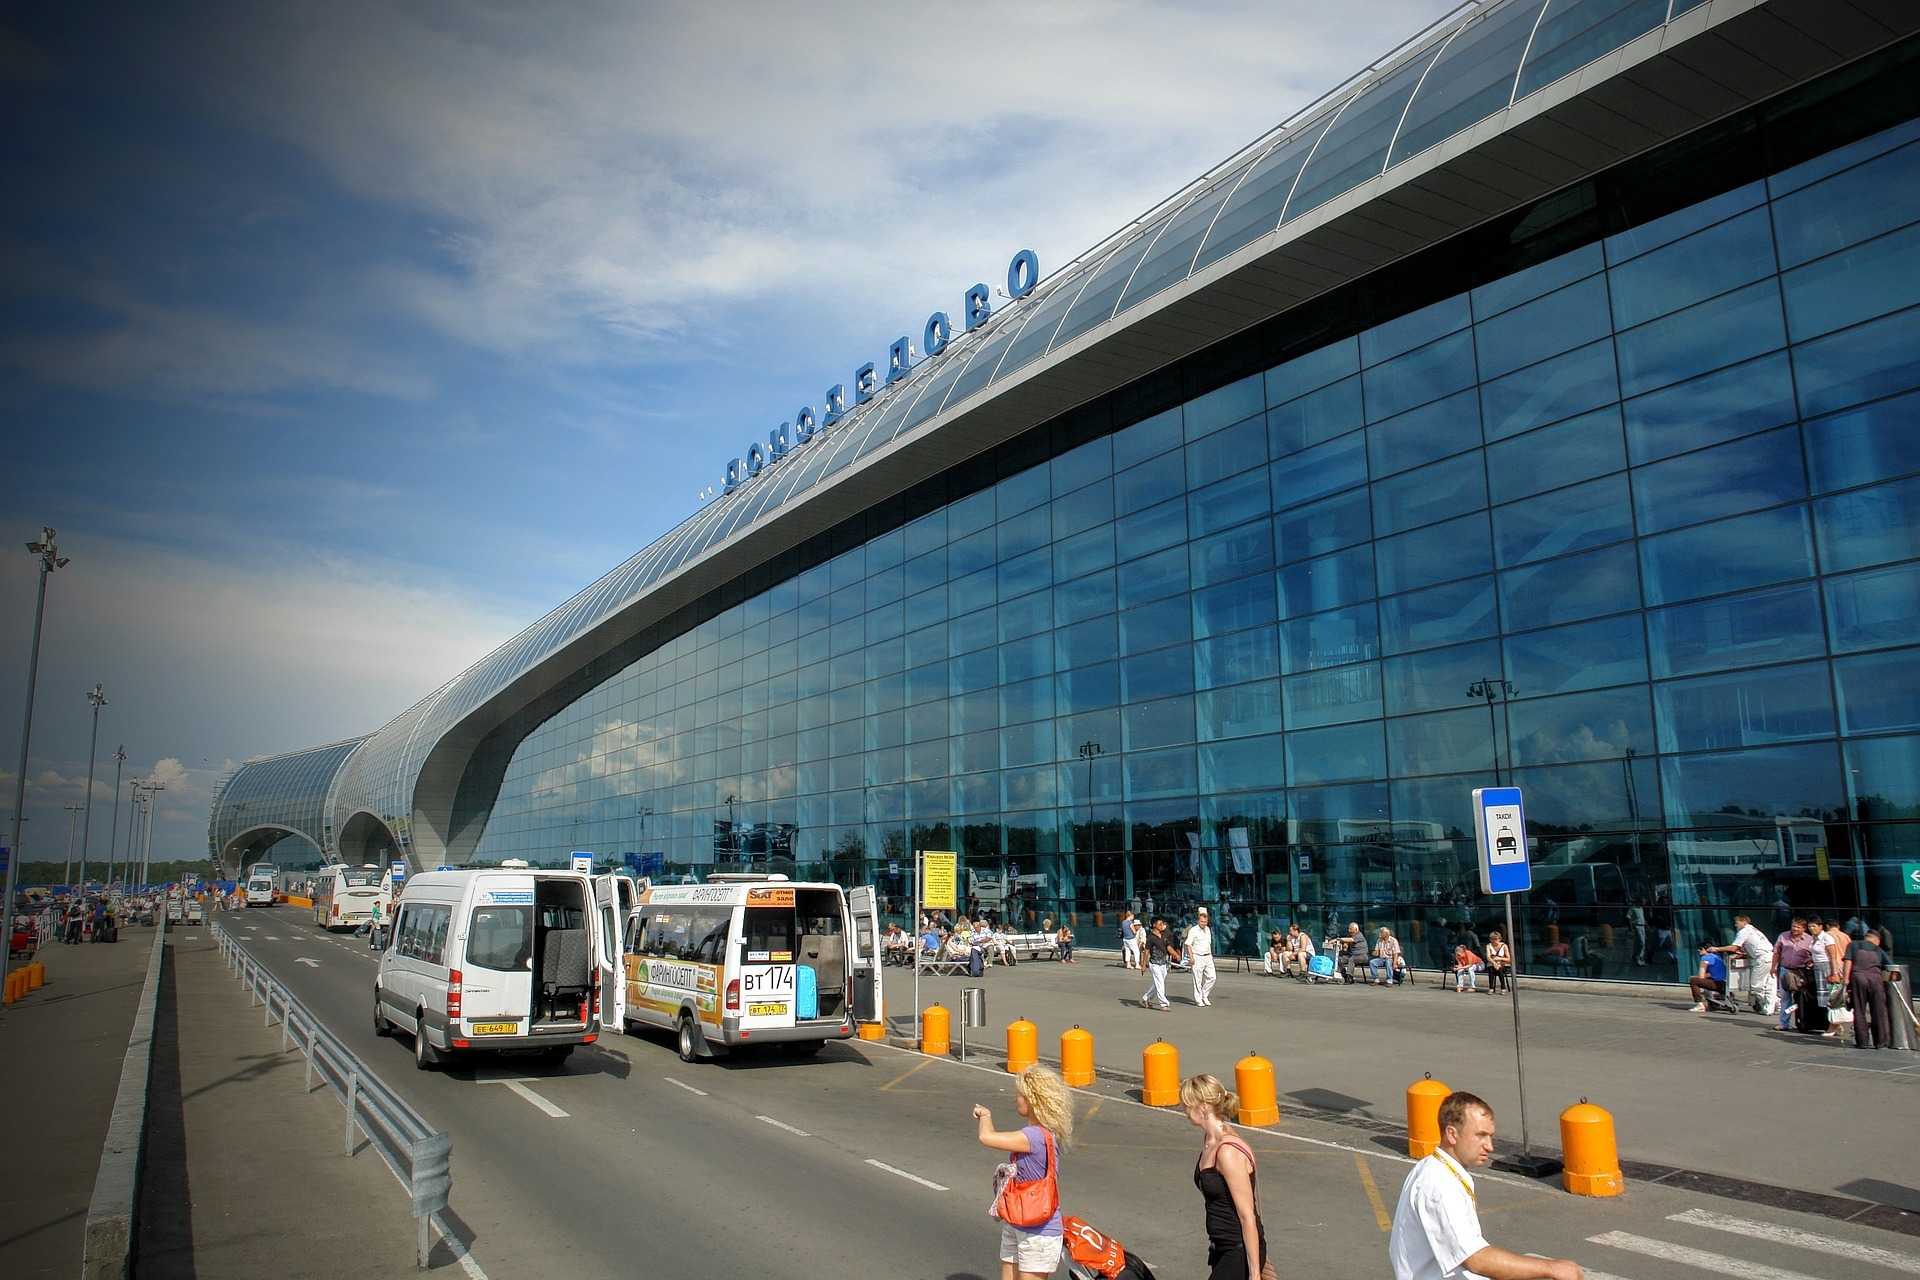 Domodedovo airport , pic. 1